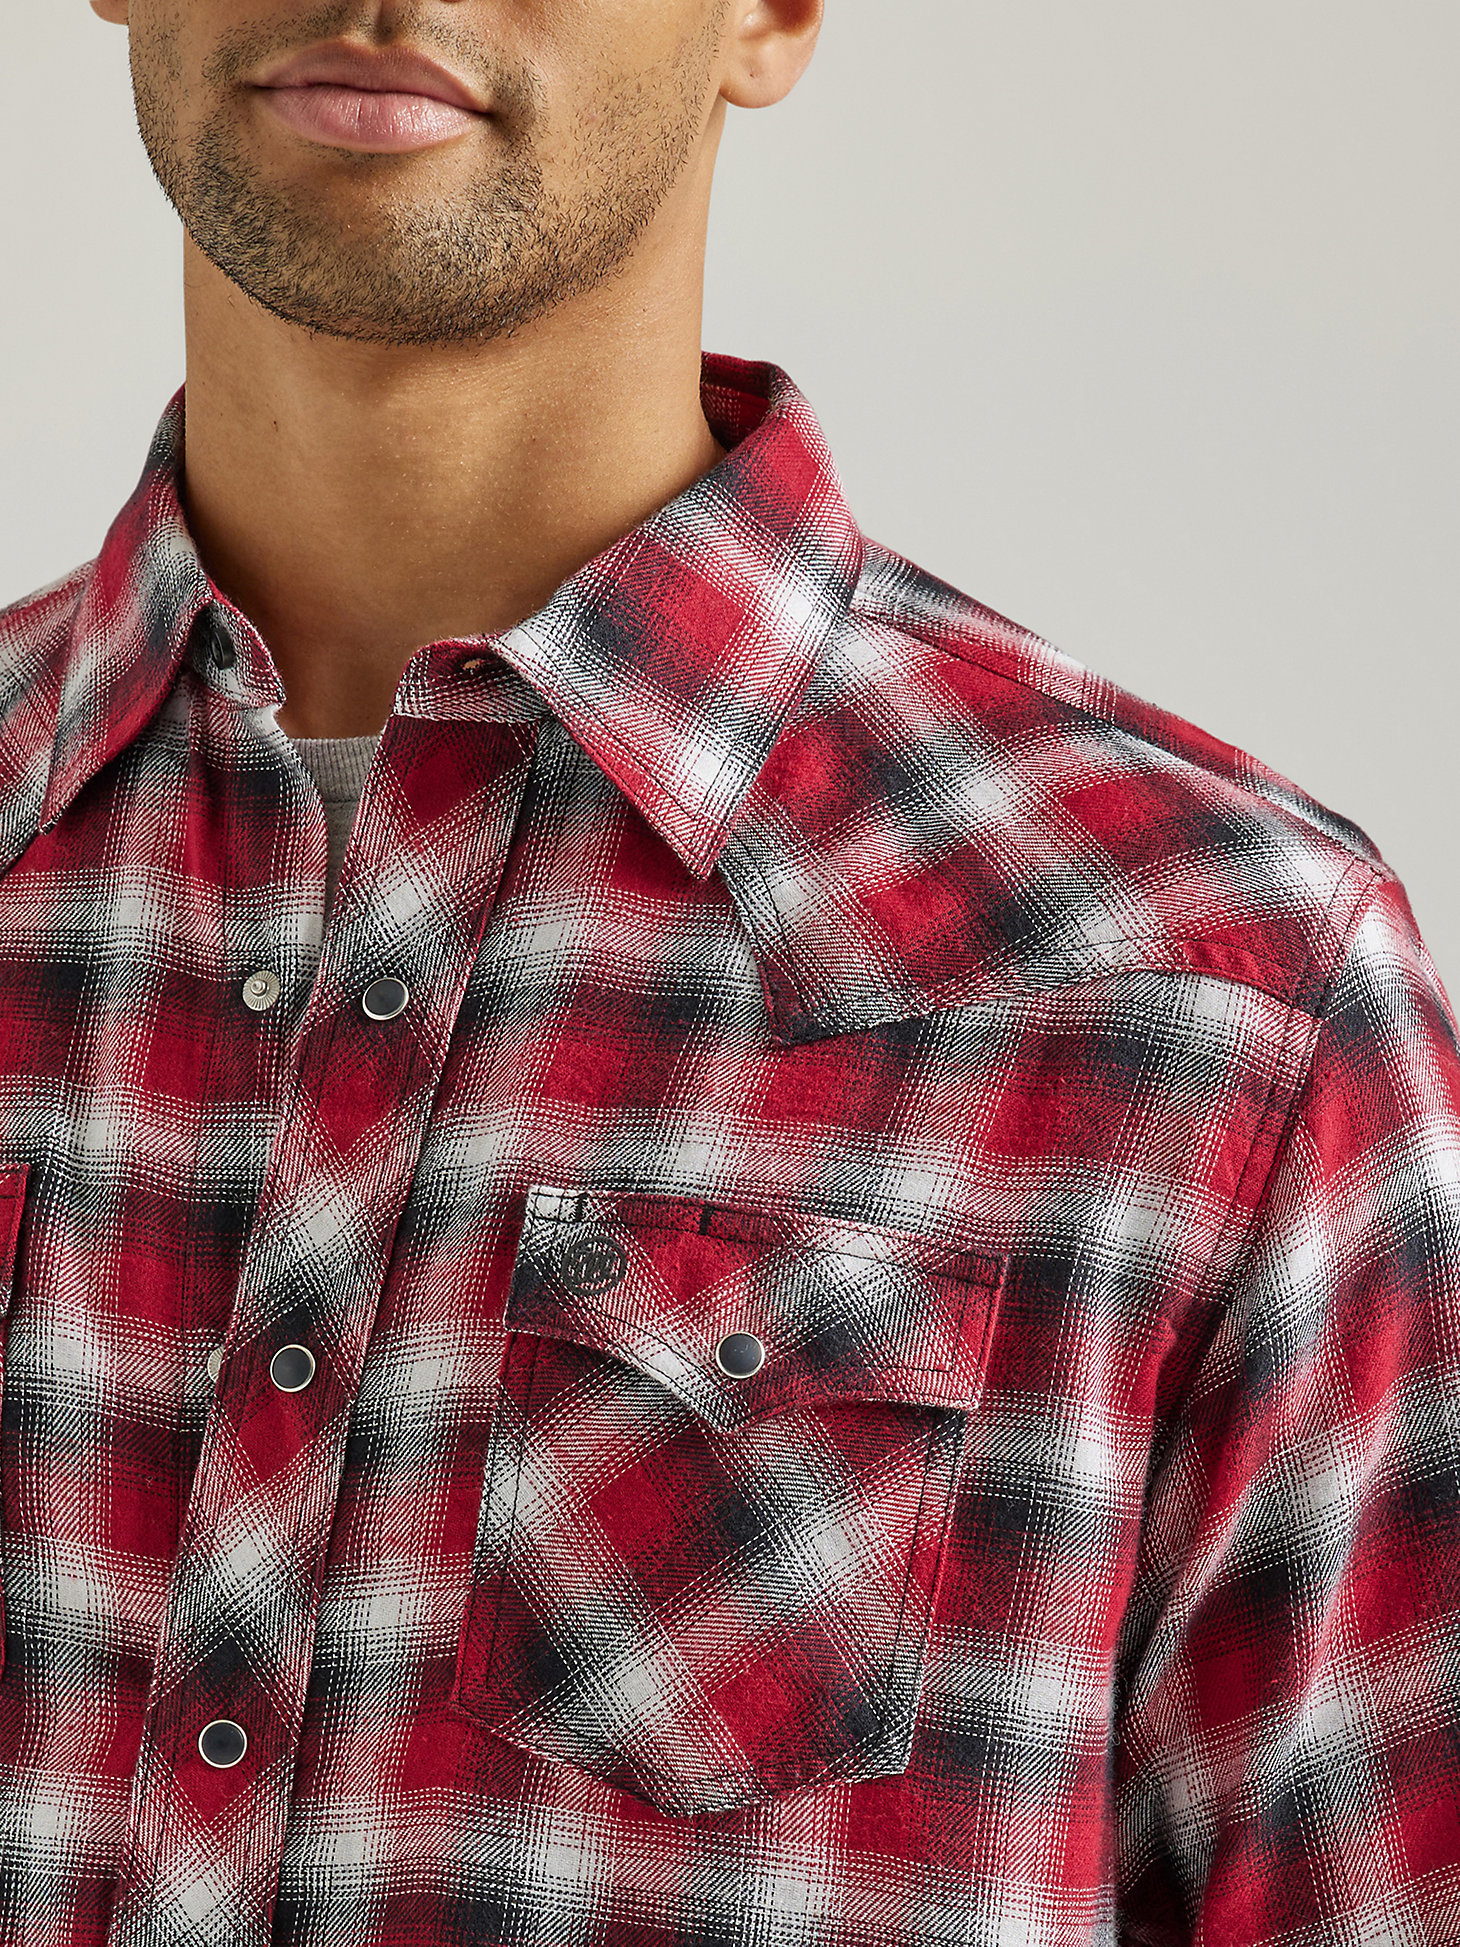 Men's Wrangler Retro® Long Sleeve Flannel Western Snap Plaid Shirt in Stormy Red alternative view 2